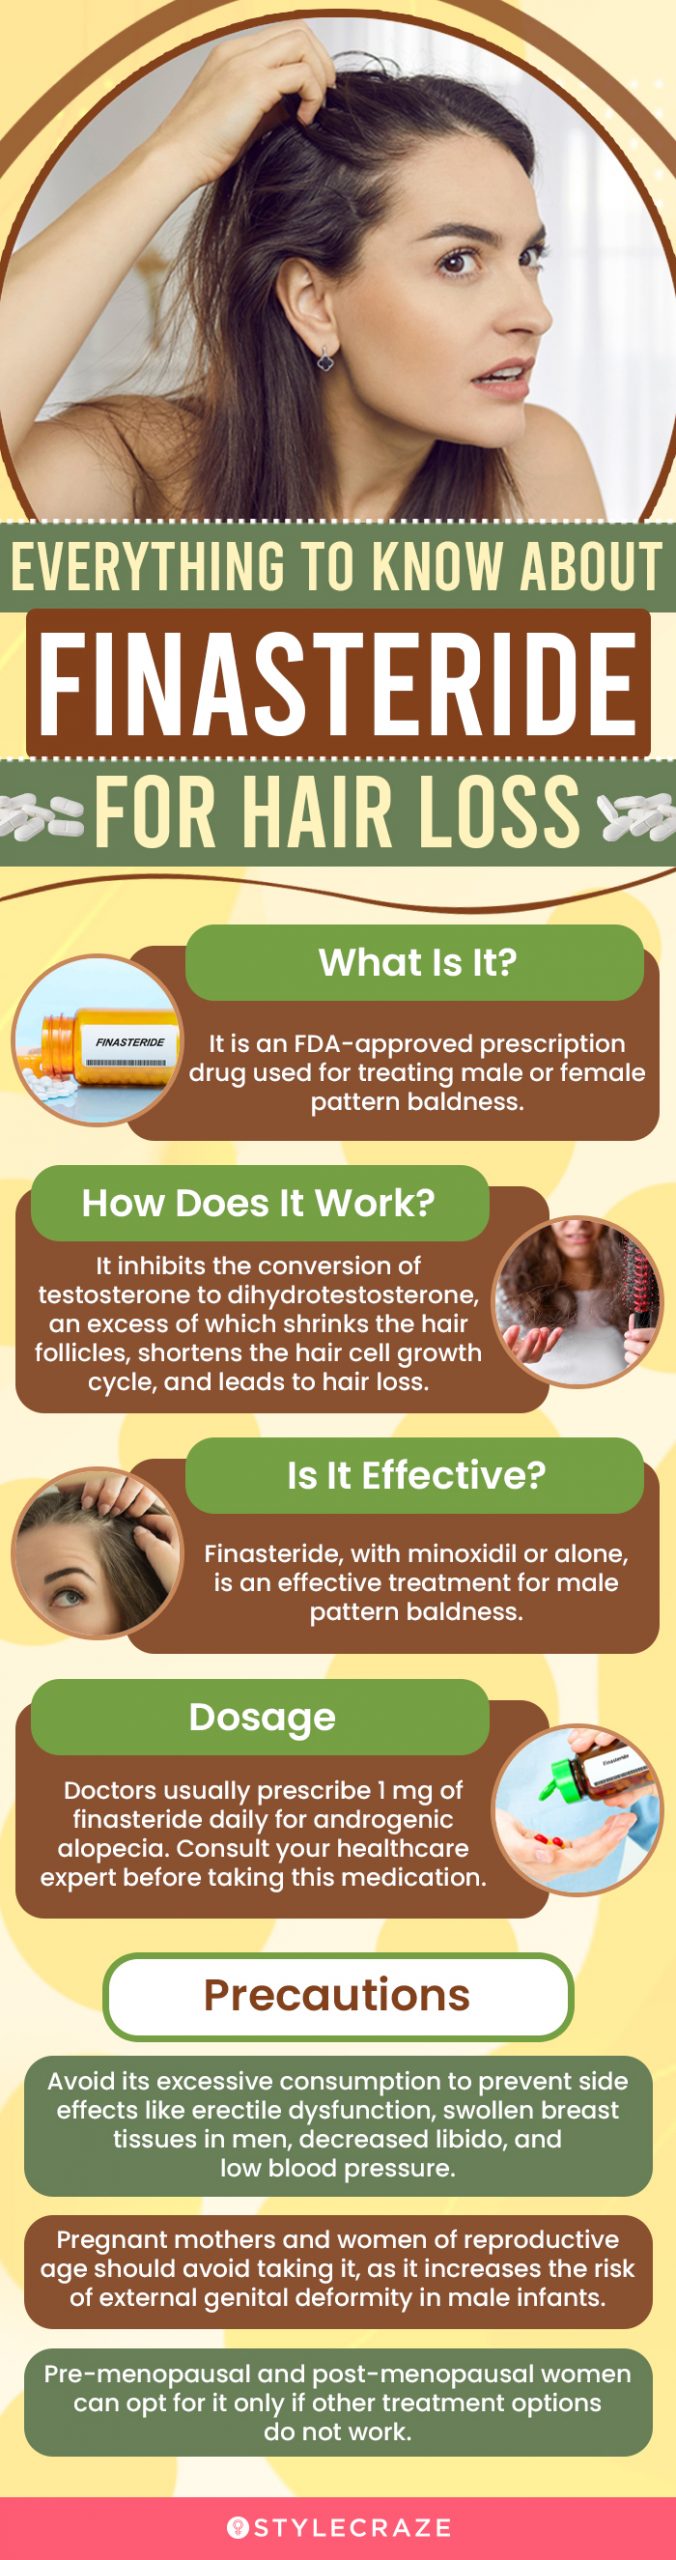 everything to know about finasteride for hair loss (infographic)